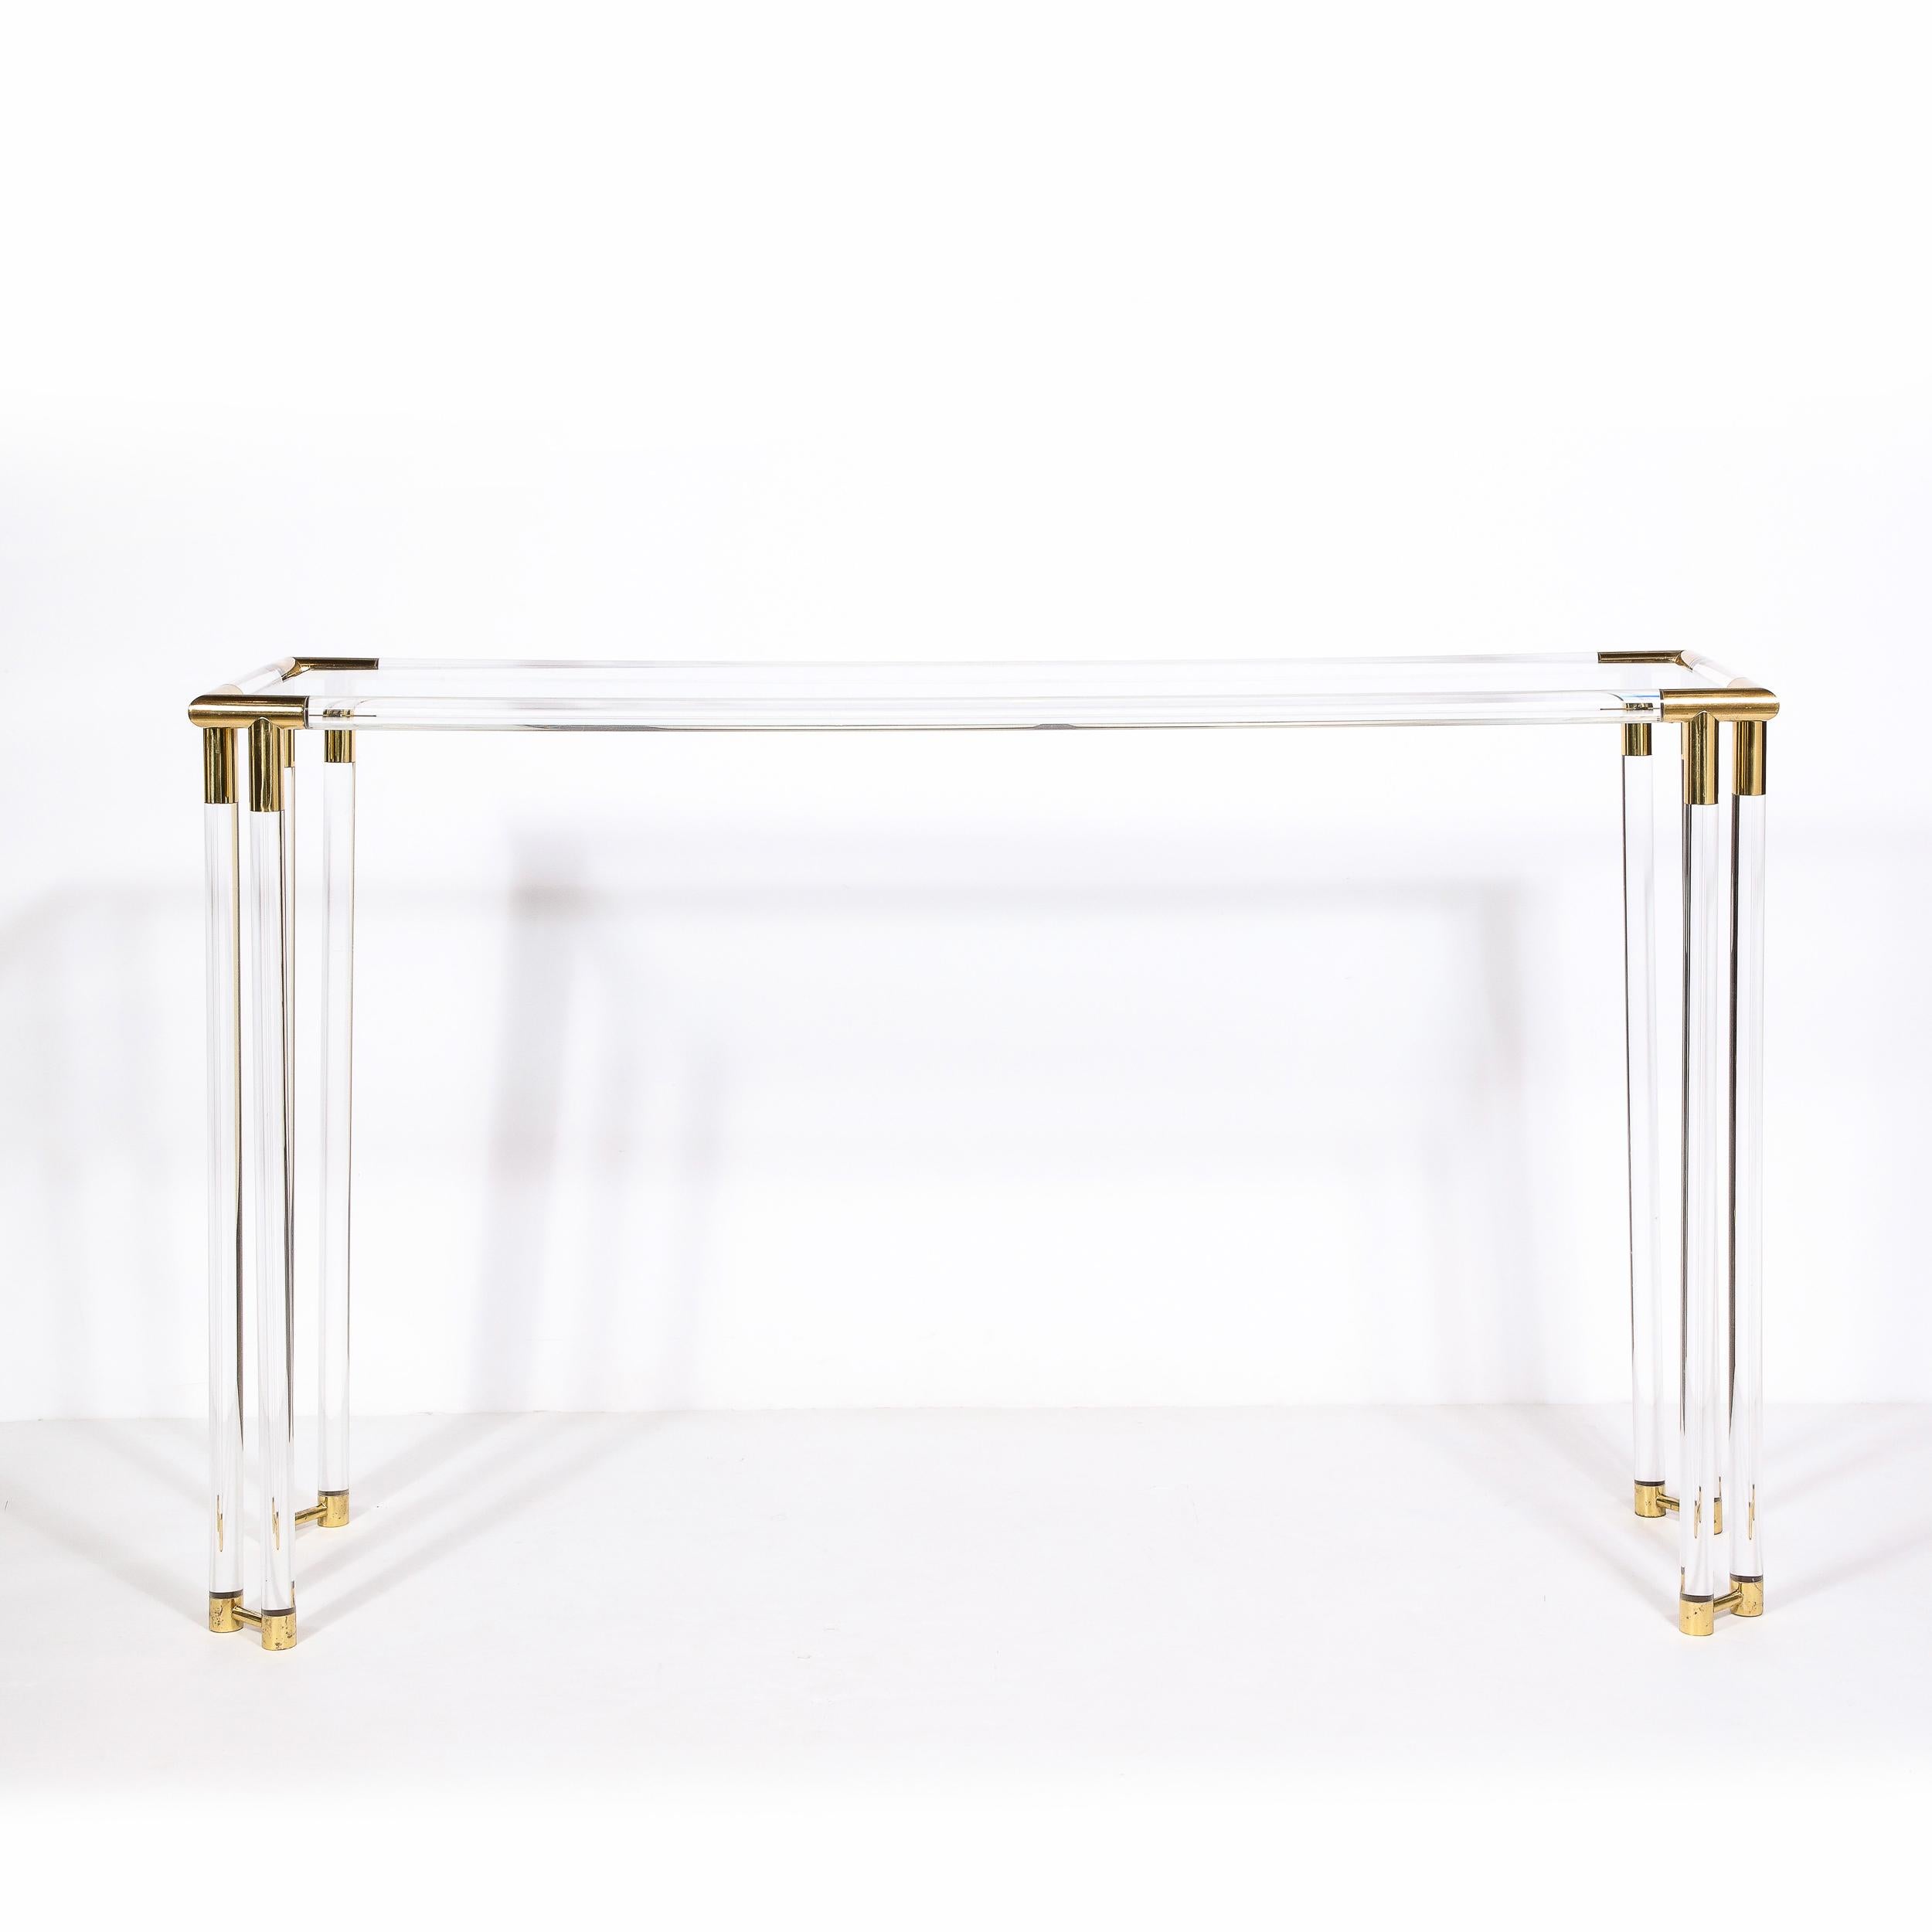 Realized in the style of Charles Hollis Jones, this striking Mid-Century Modern console table was executed in the United States circa 1970. It offers cylindrical brass capped lucite legs that adjoin to the corners of the brass wrapped top imbuing